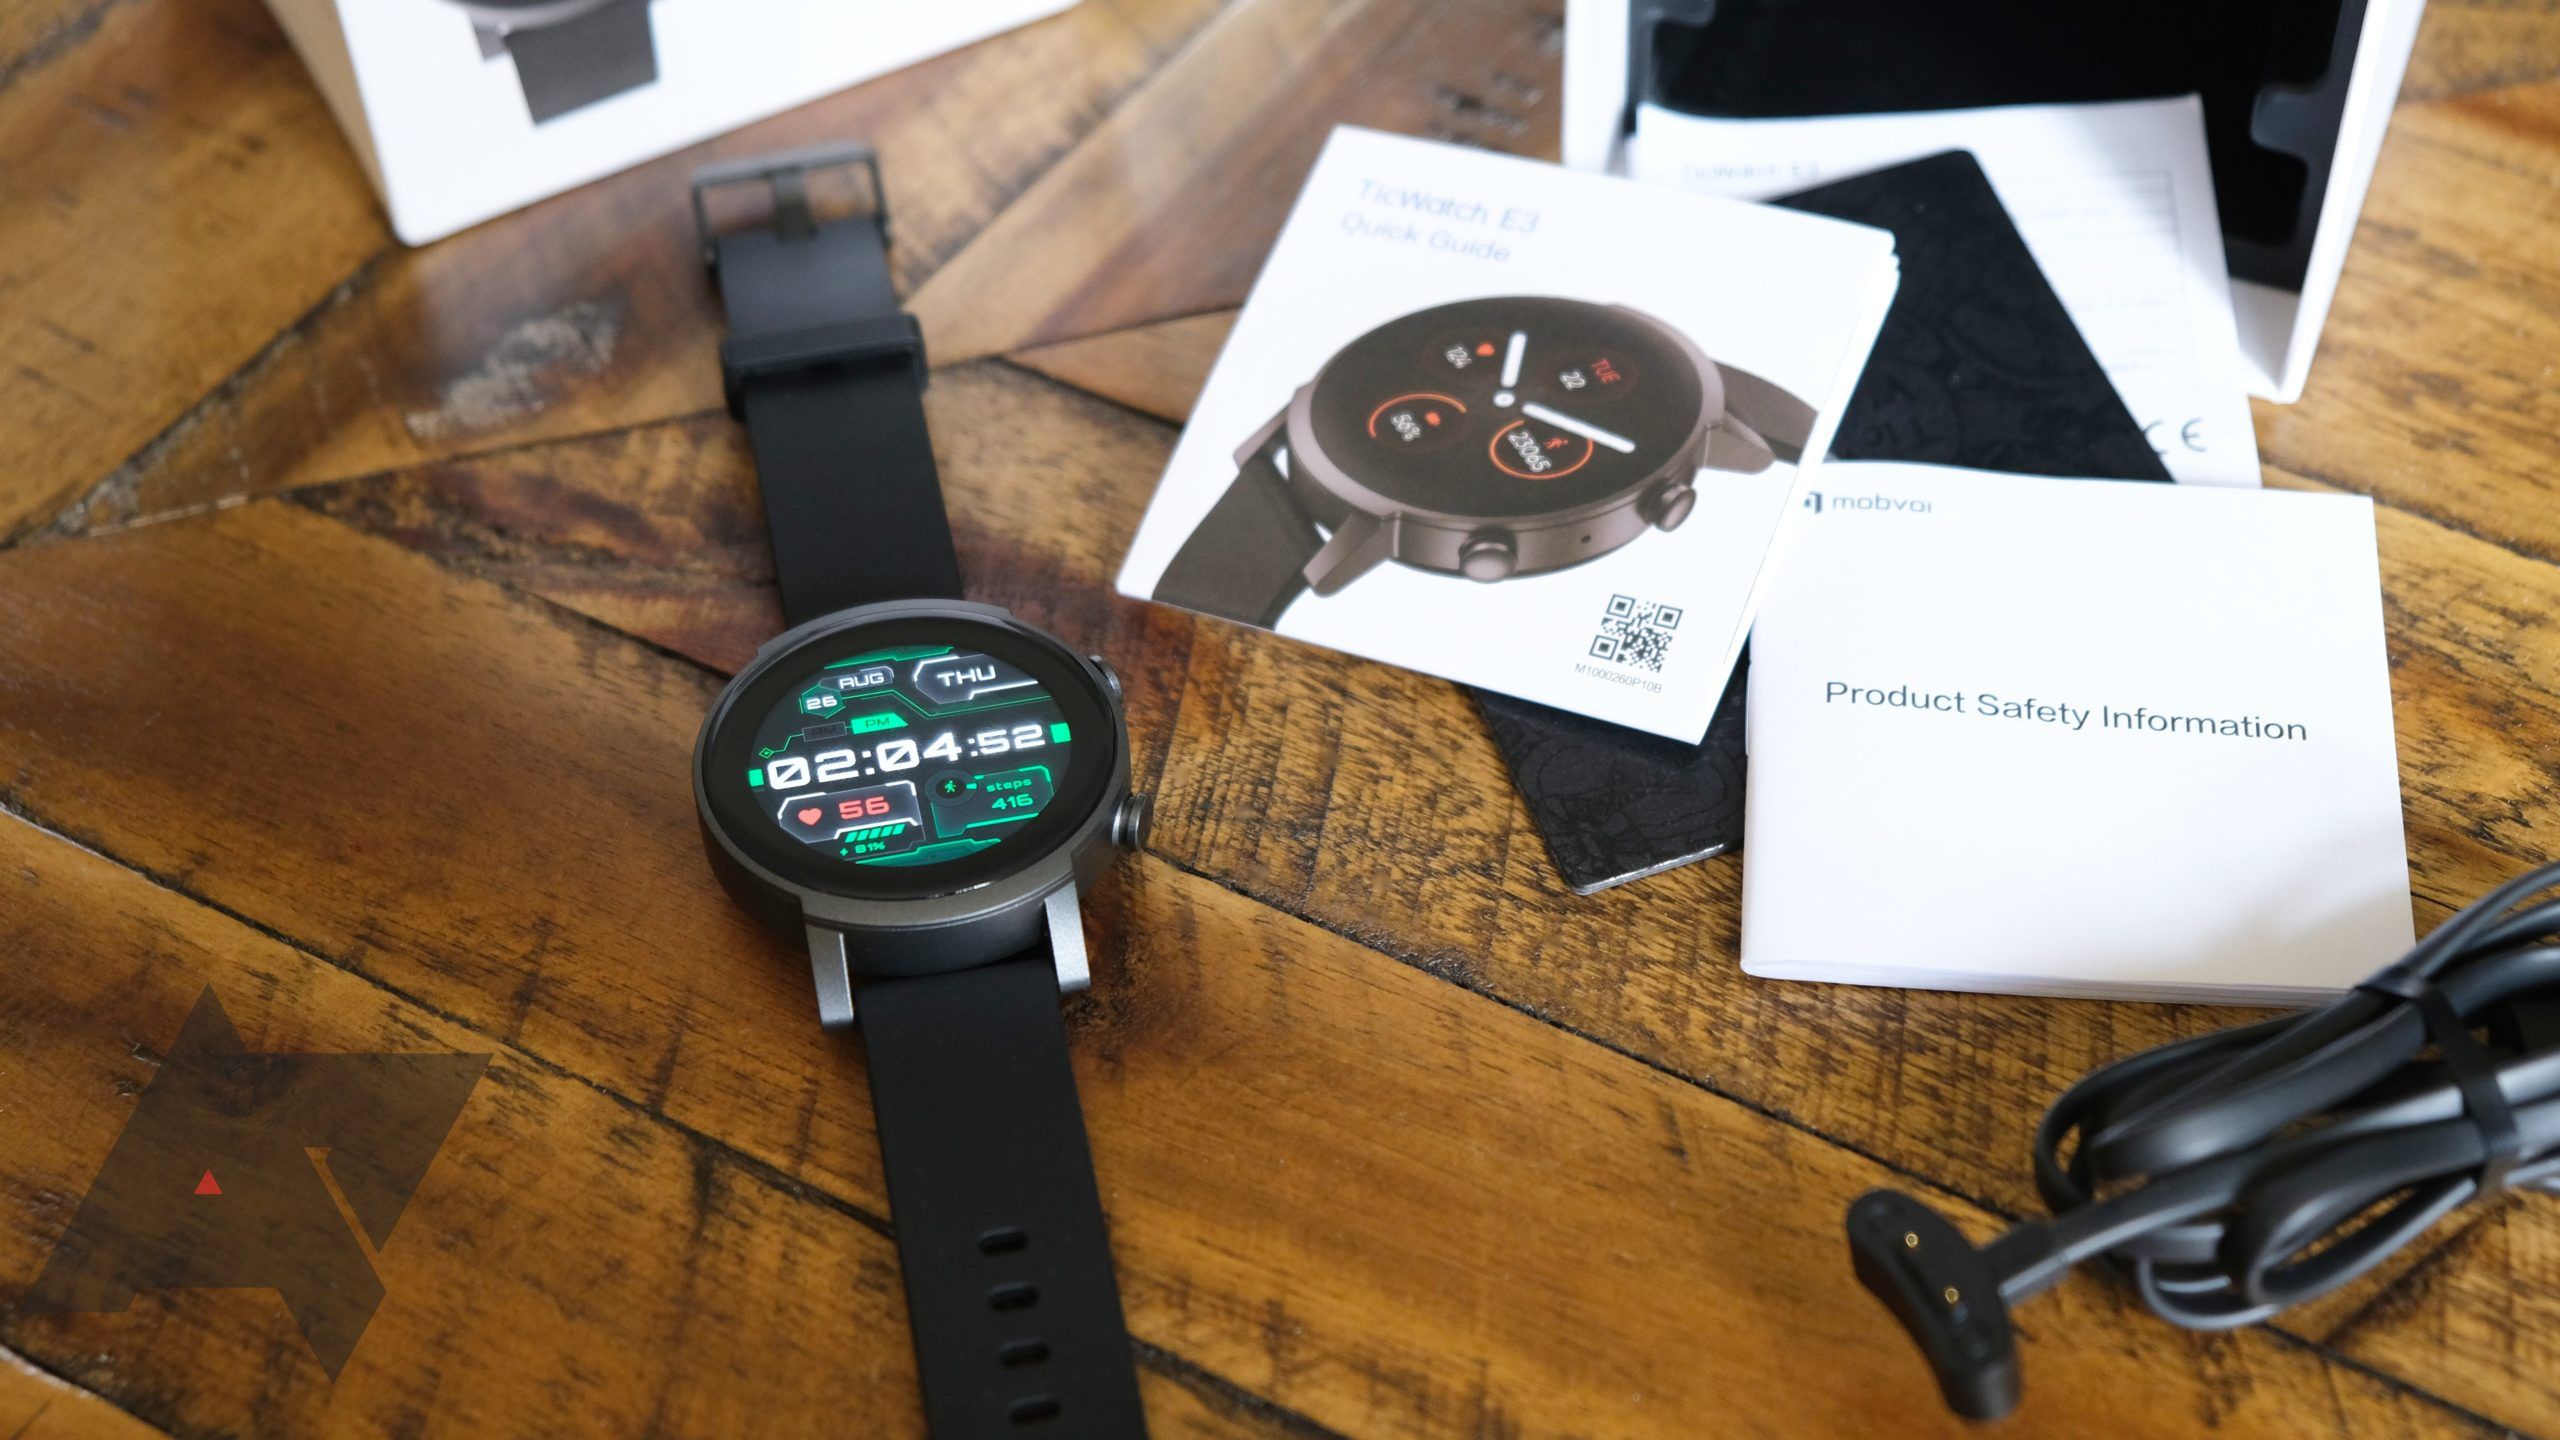 Mobvoi TicWatch E3 review: All dressed up with nowhere to go